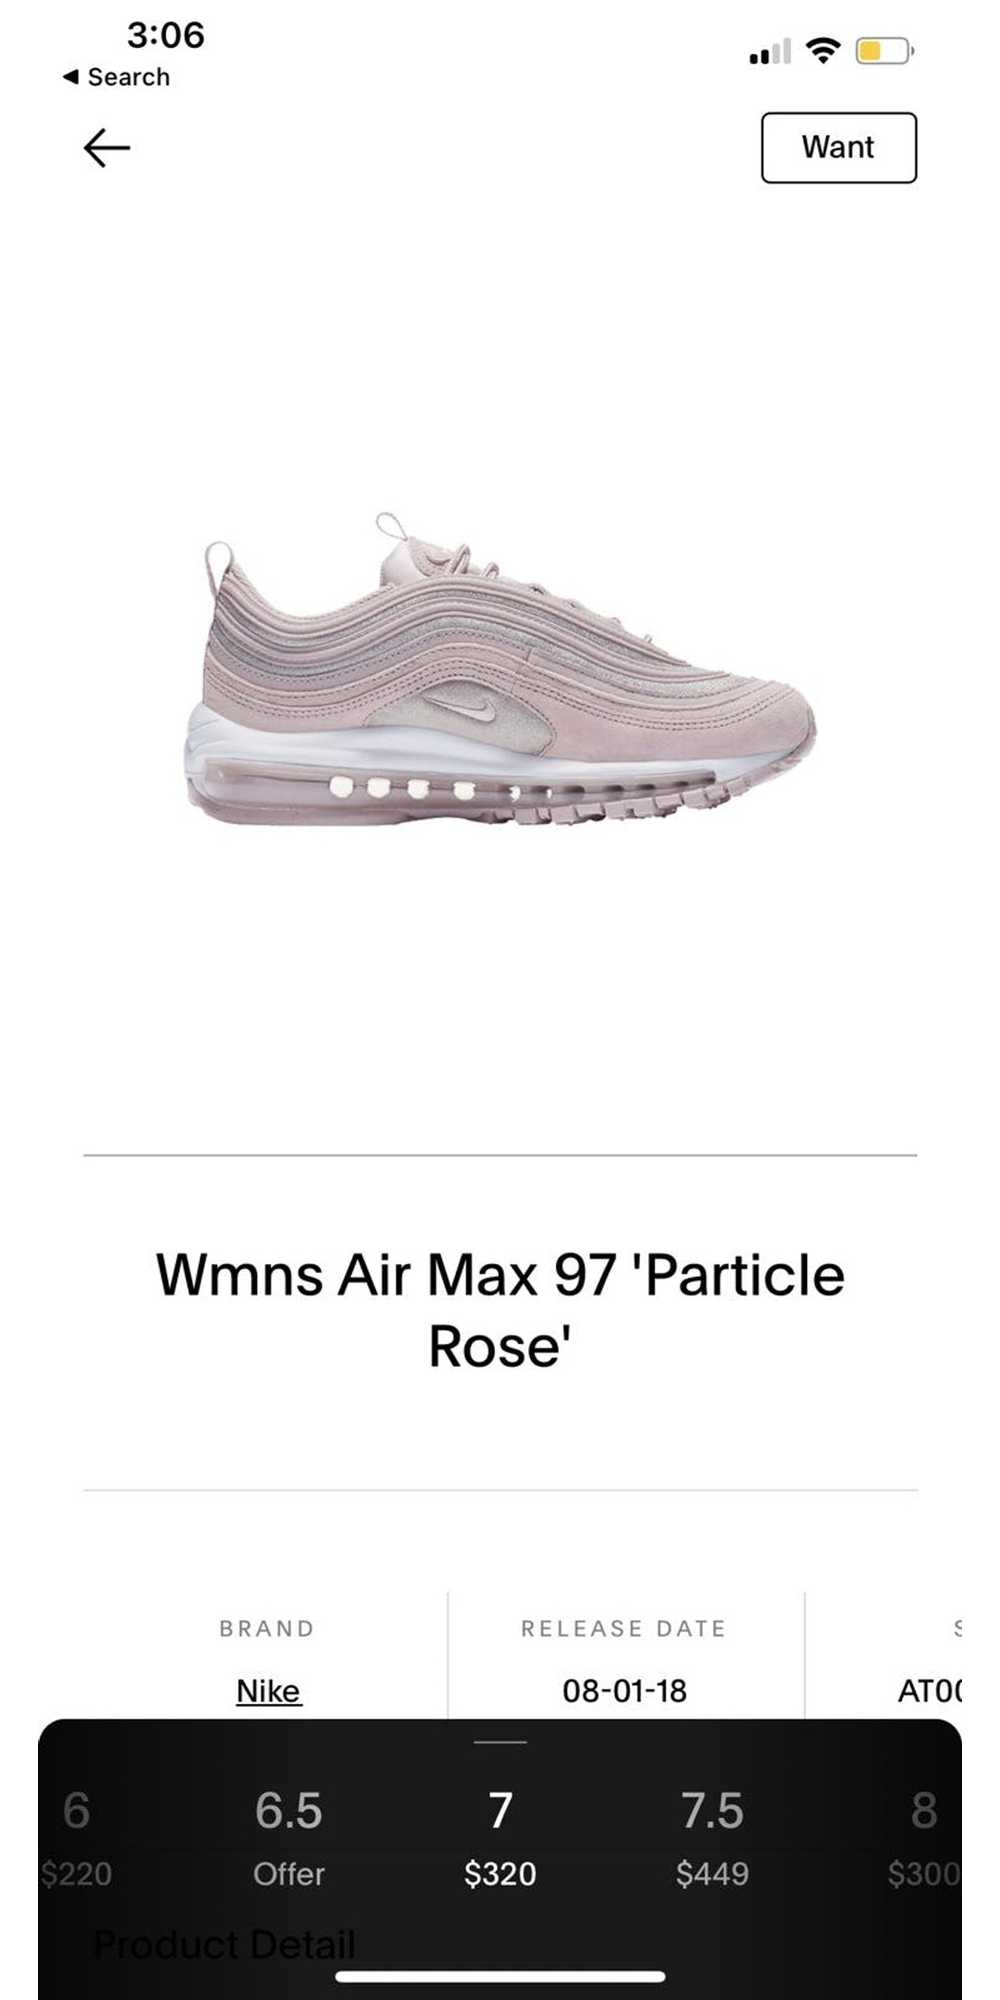 Nike Wmns Air Max 97 ‘Particle Rose’ - image 1